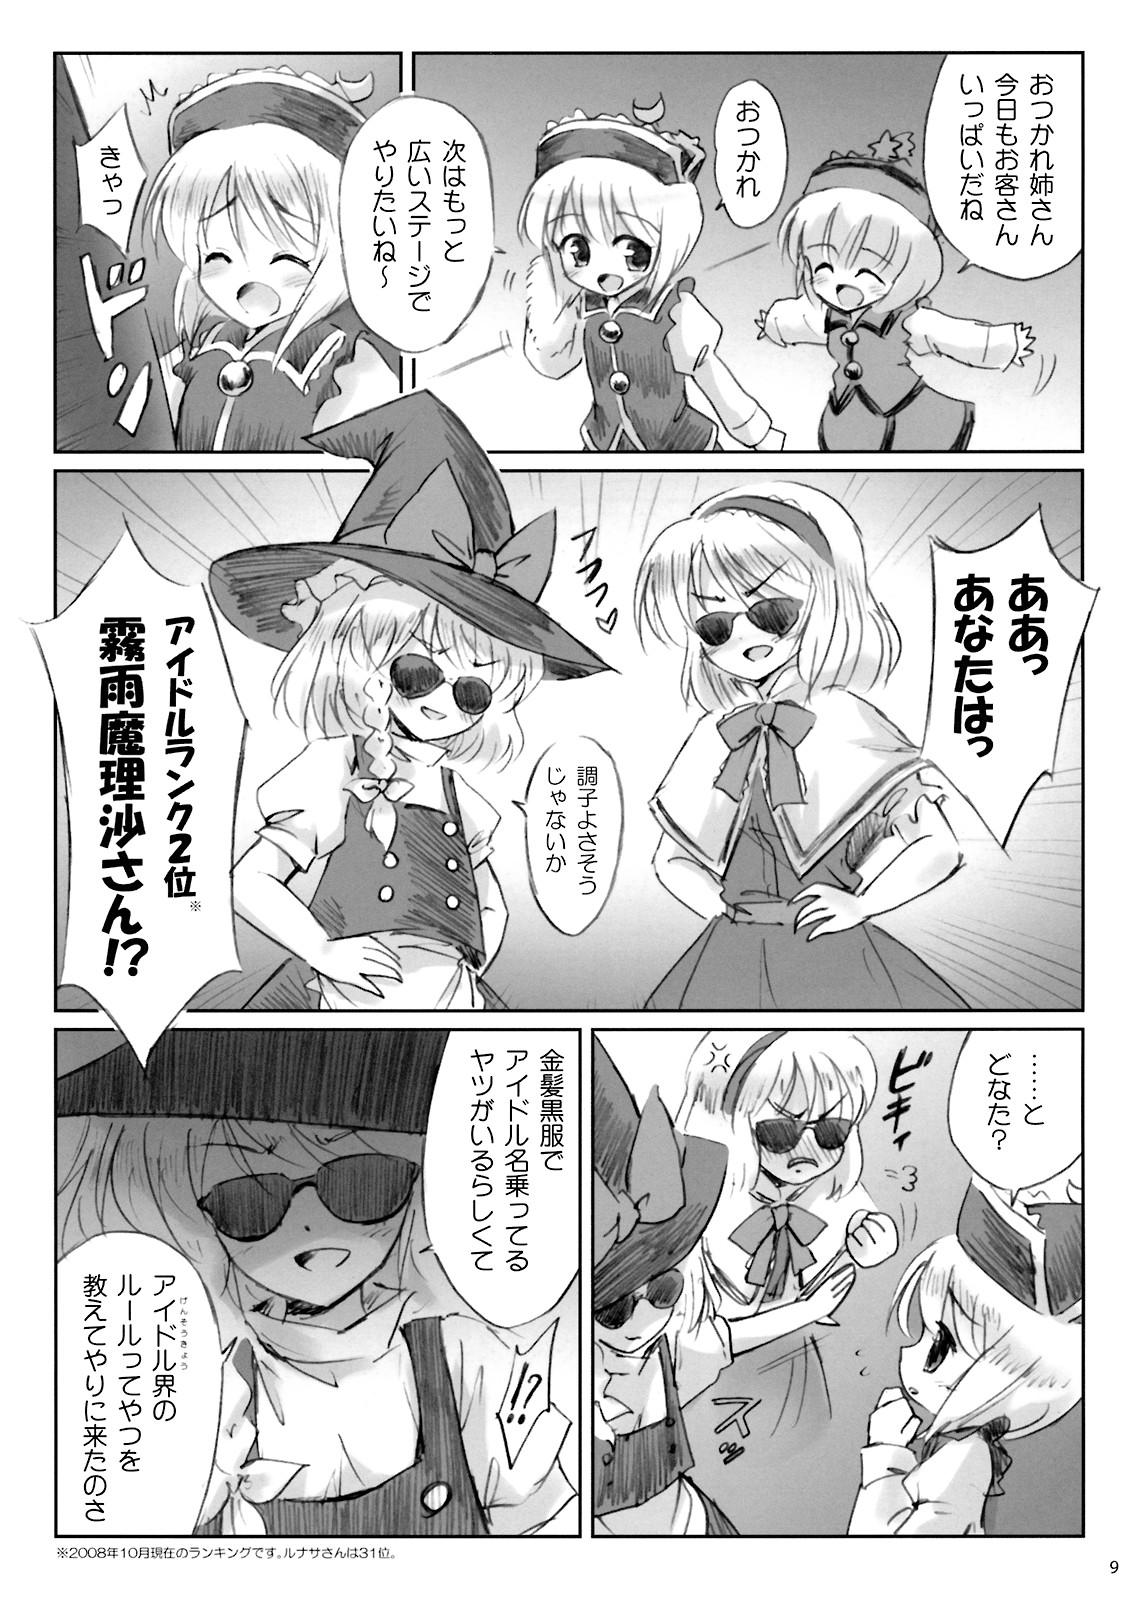 Amature Porn IDOLMASTER - Touhou project Facial - Page 8